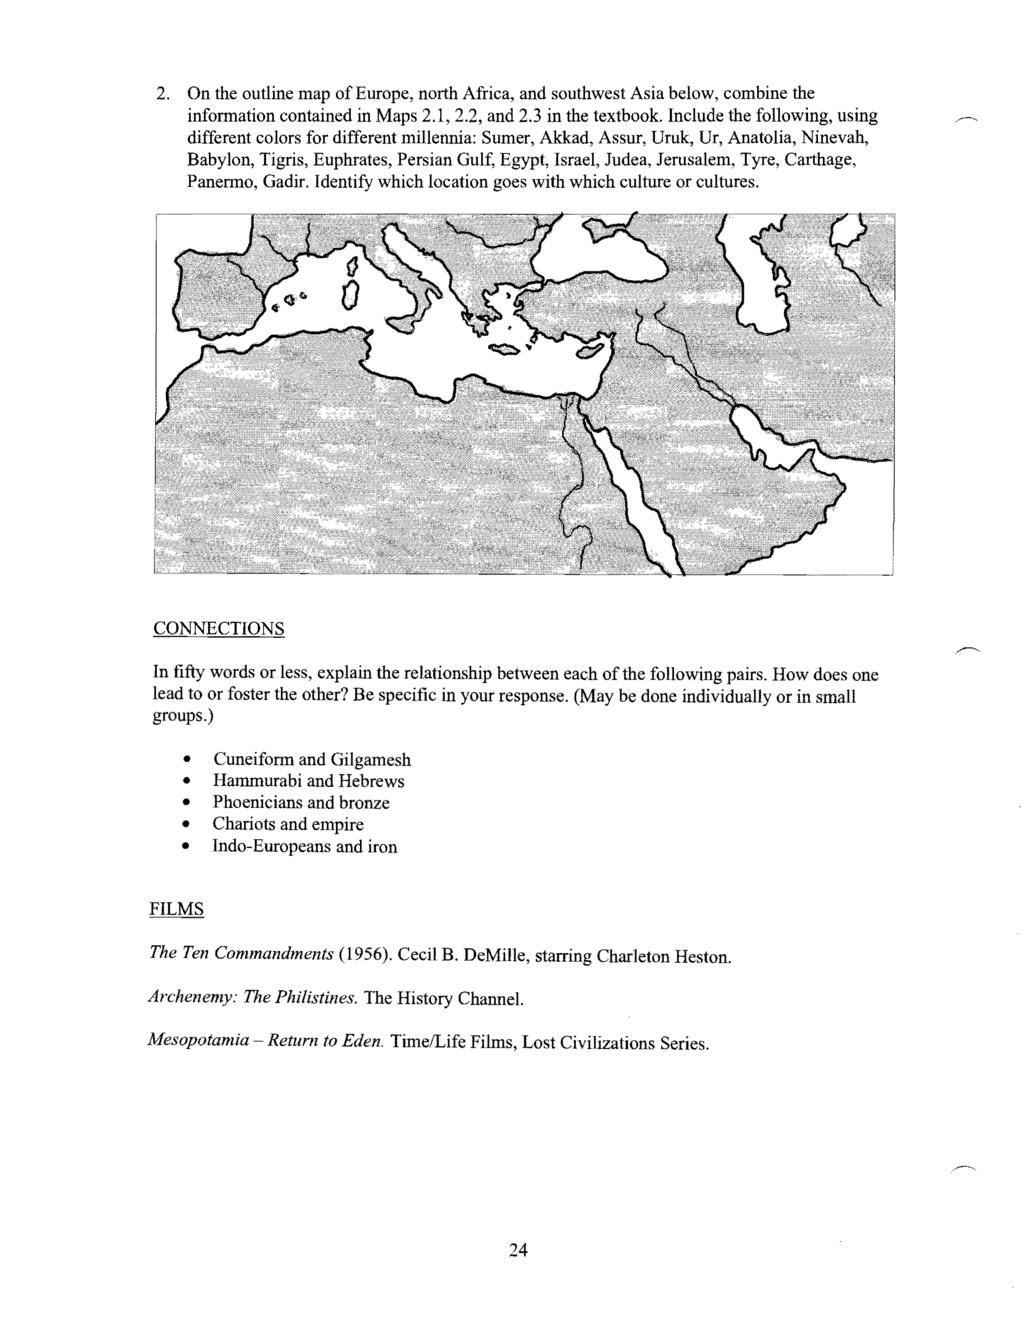 2. On the outline map of Europe, north Africa, and southwest Asia below, combine the information contained in Maps 2.1, 2.2, and 2.3 in the textbook.